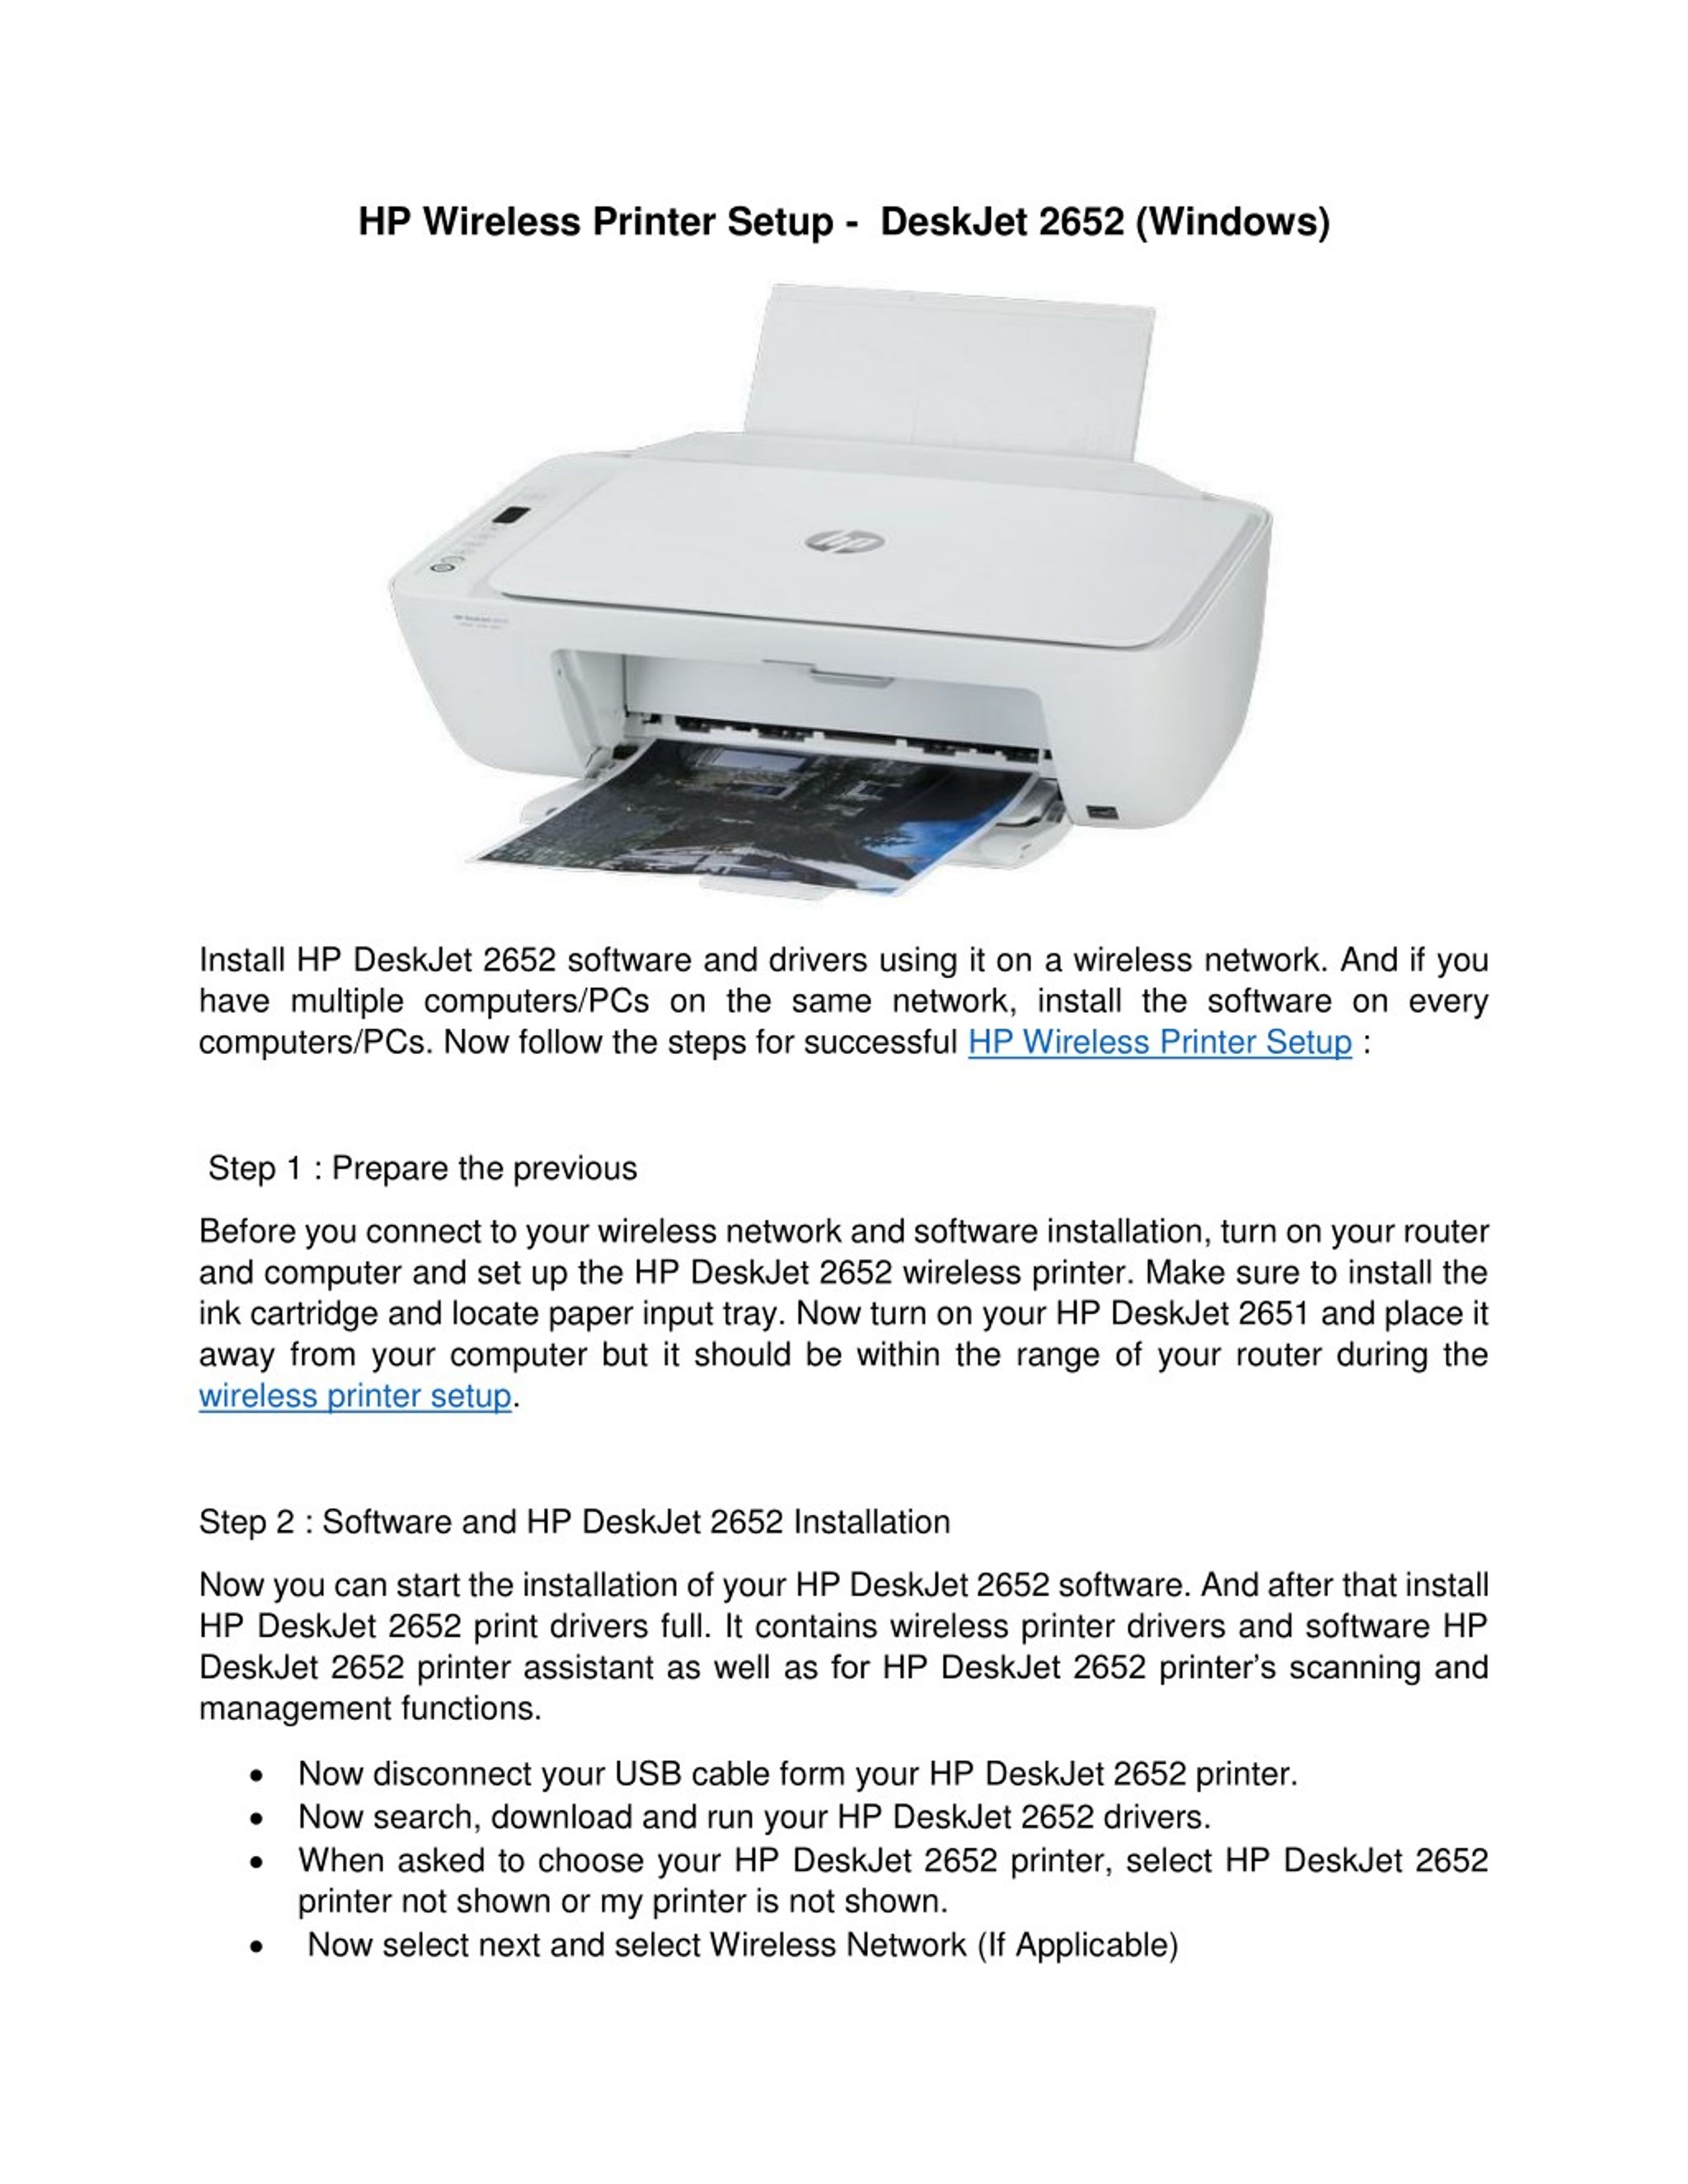 HP Deskjet All In One Printer Learn How To Set Up/ Connect To WIFI Network  